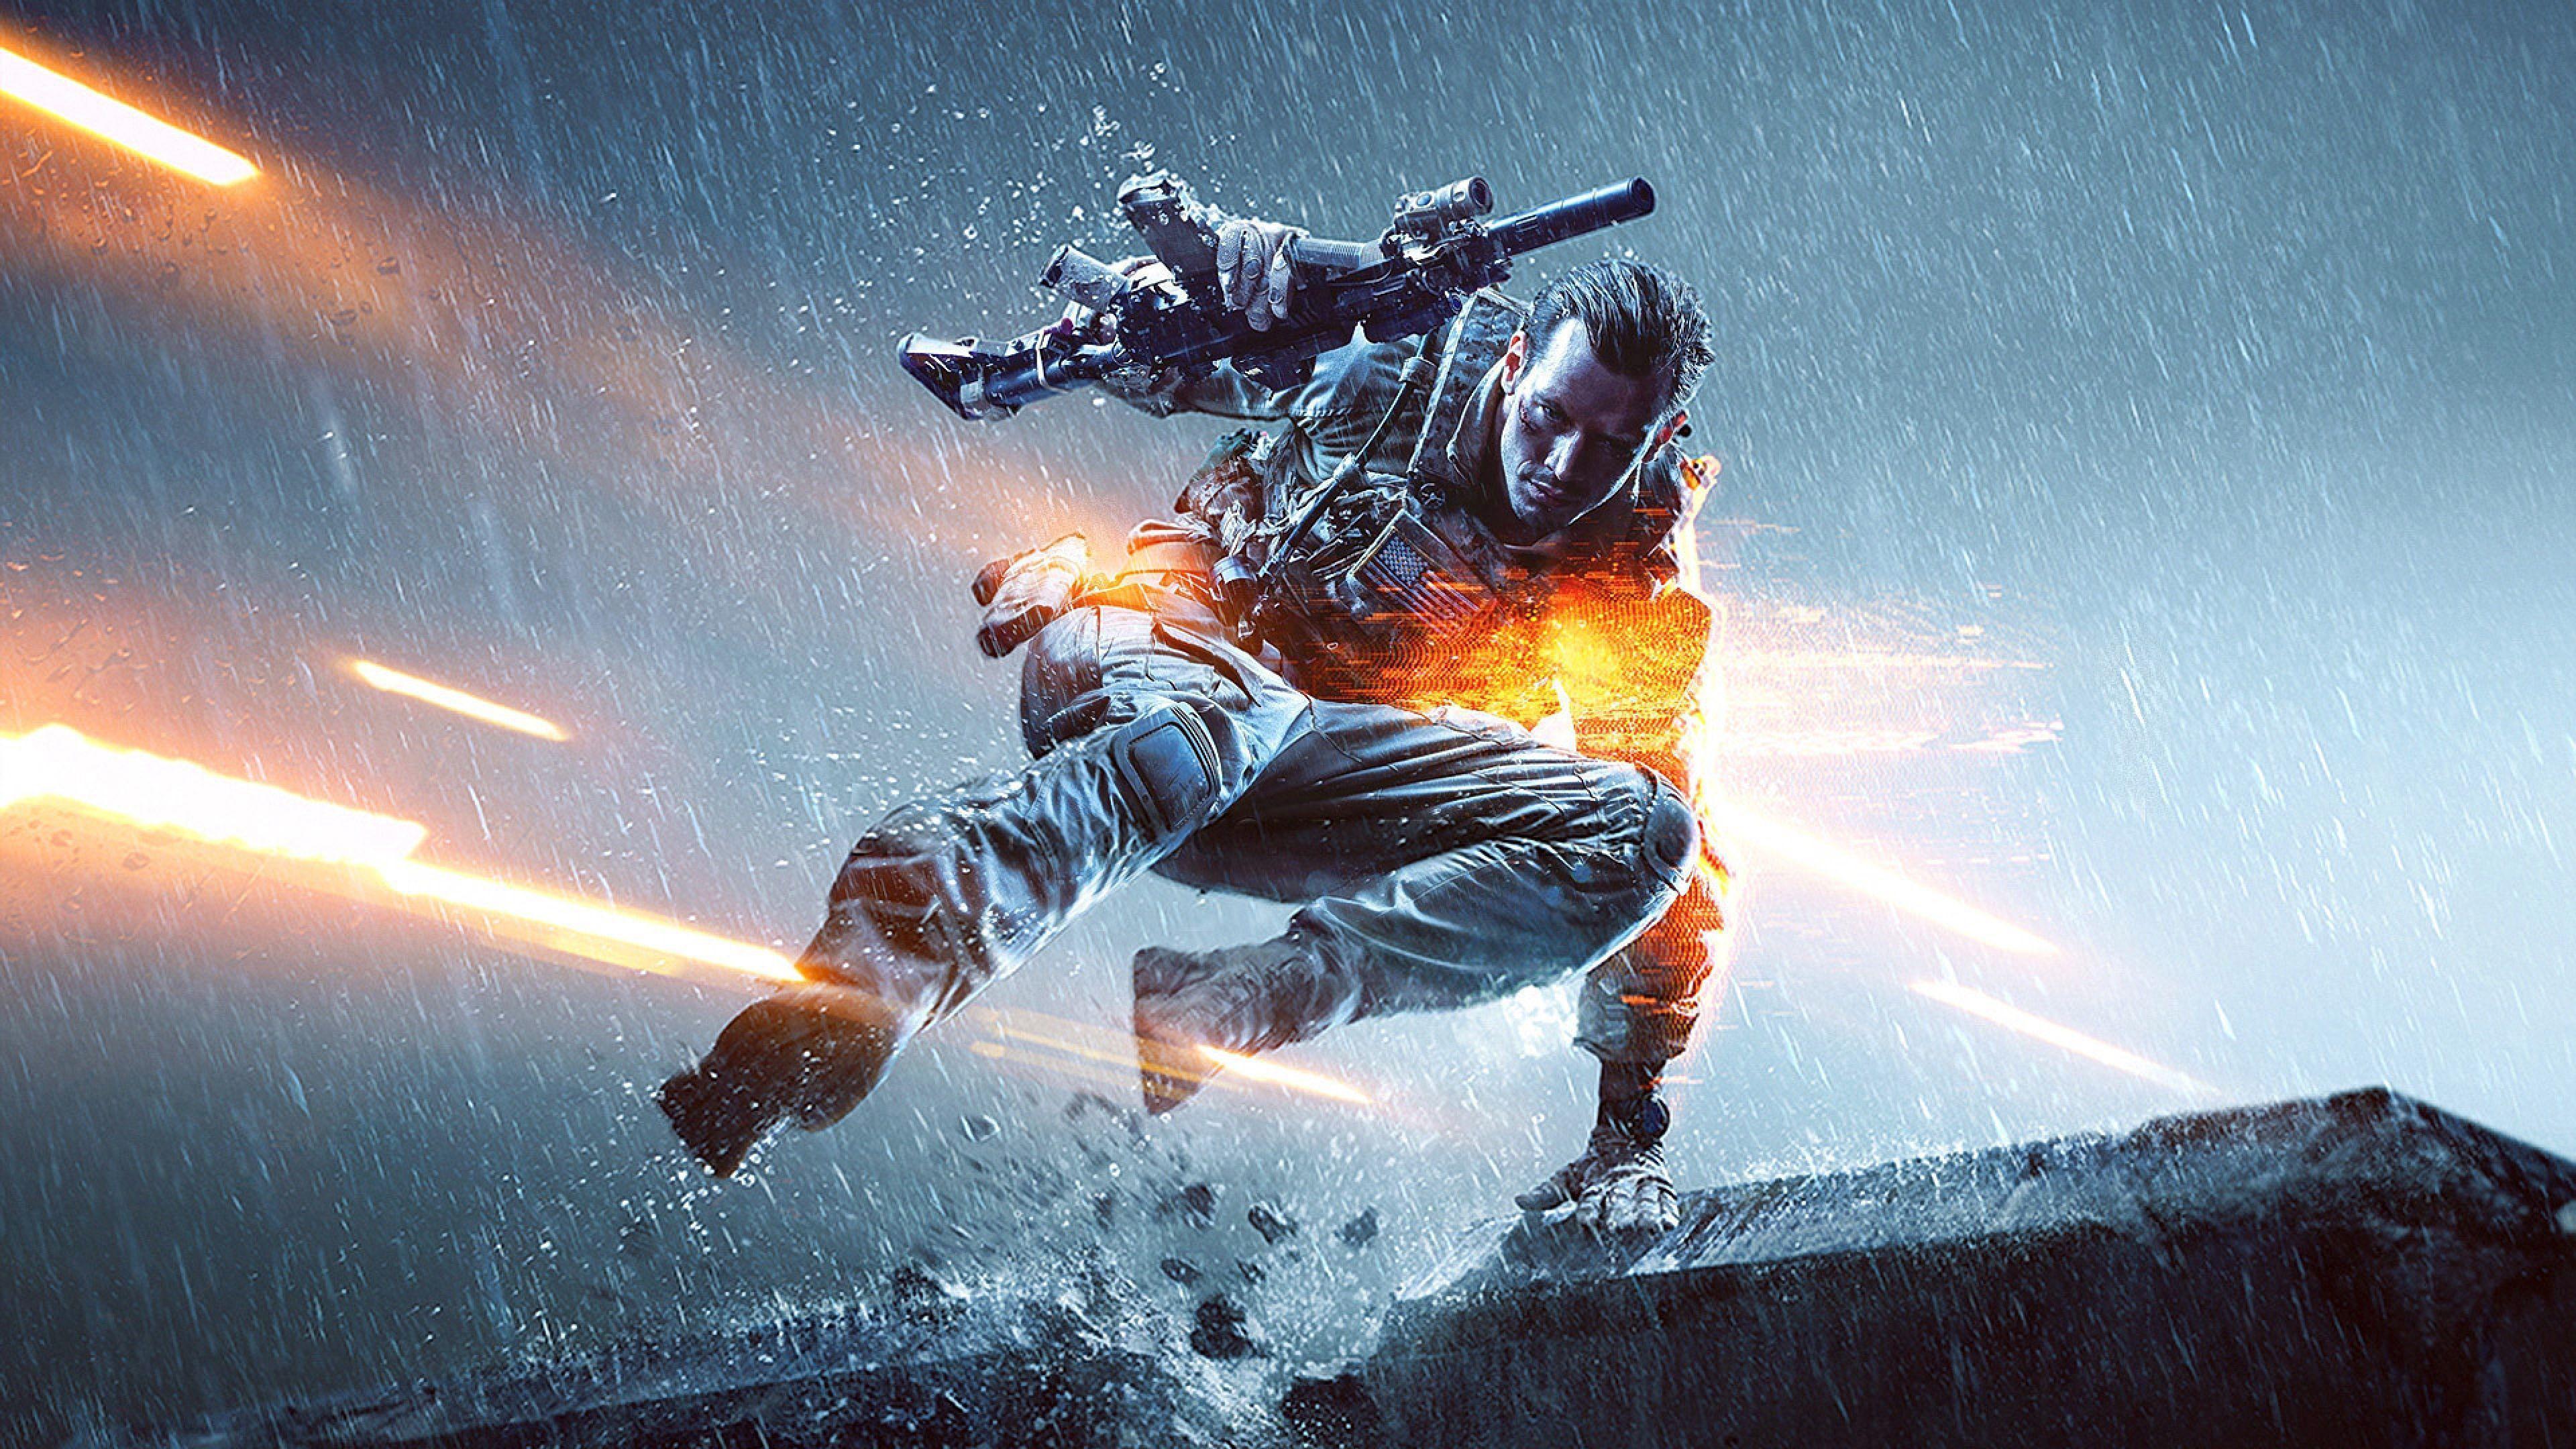 Battlefield 4 to be shown off by EA in the next three months - GameSpot